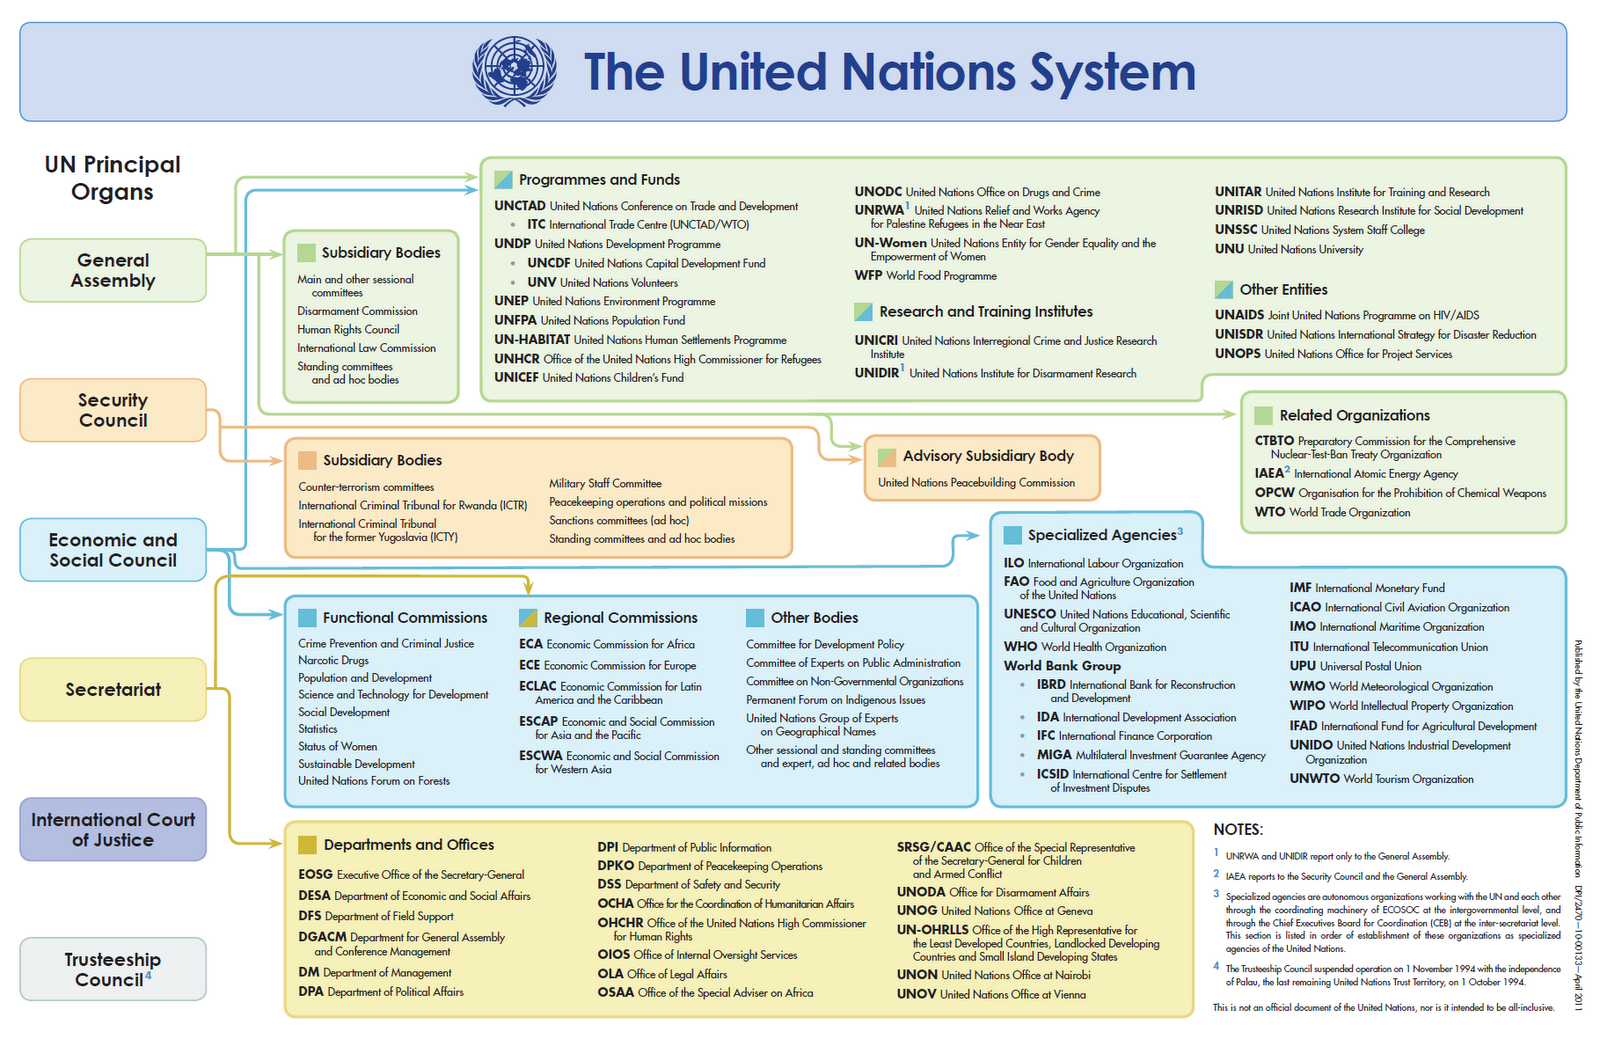 Visible Business: The United Nations System Organizational Chart